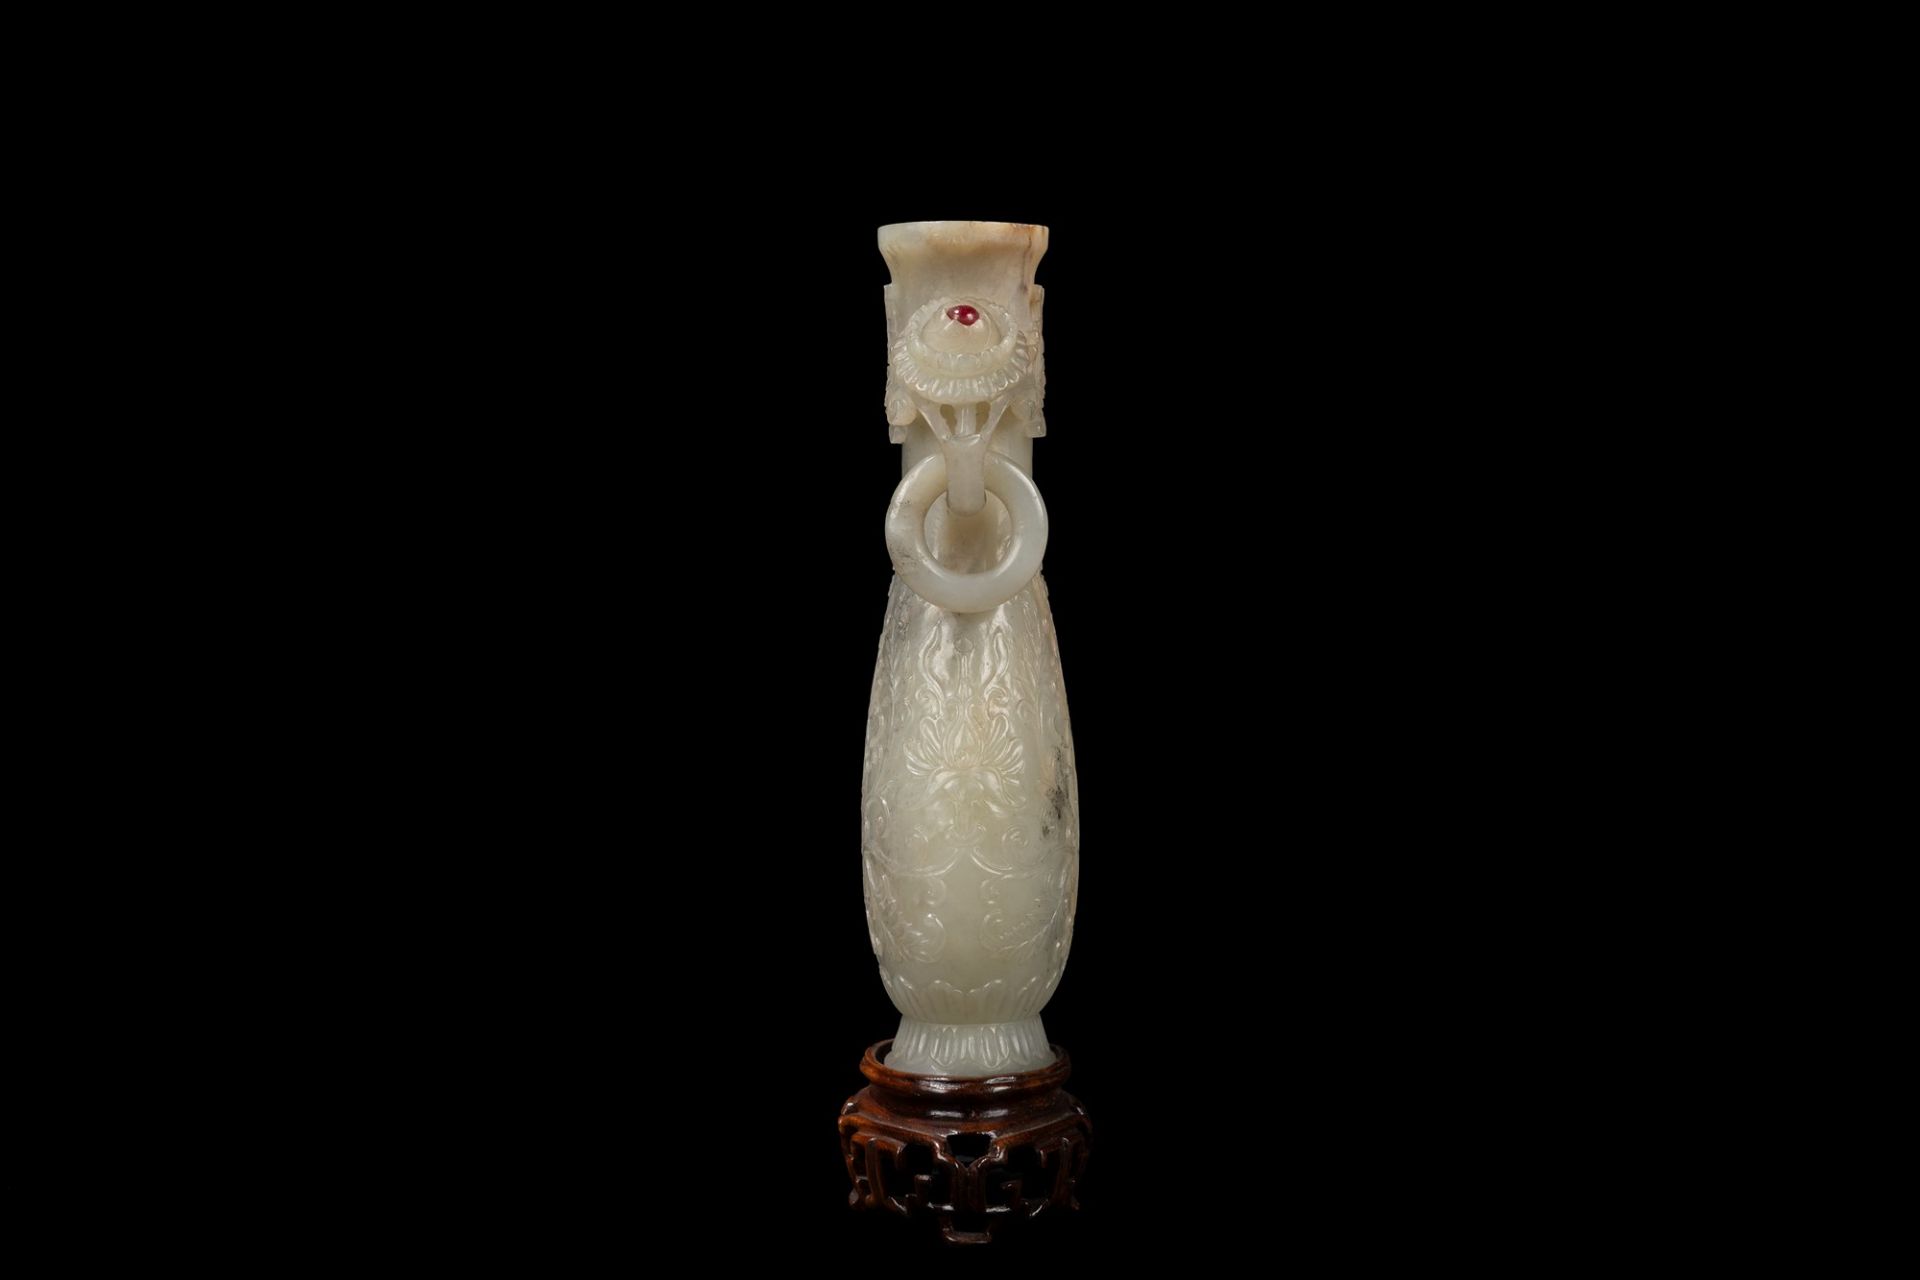 A CHINESE MUGHAL STYLE CARVED CELADON JADE ELONGATED VASE, China, Qing dynasty, 19th / 20th century - Image 2 of 3